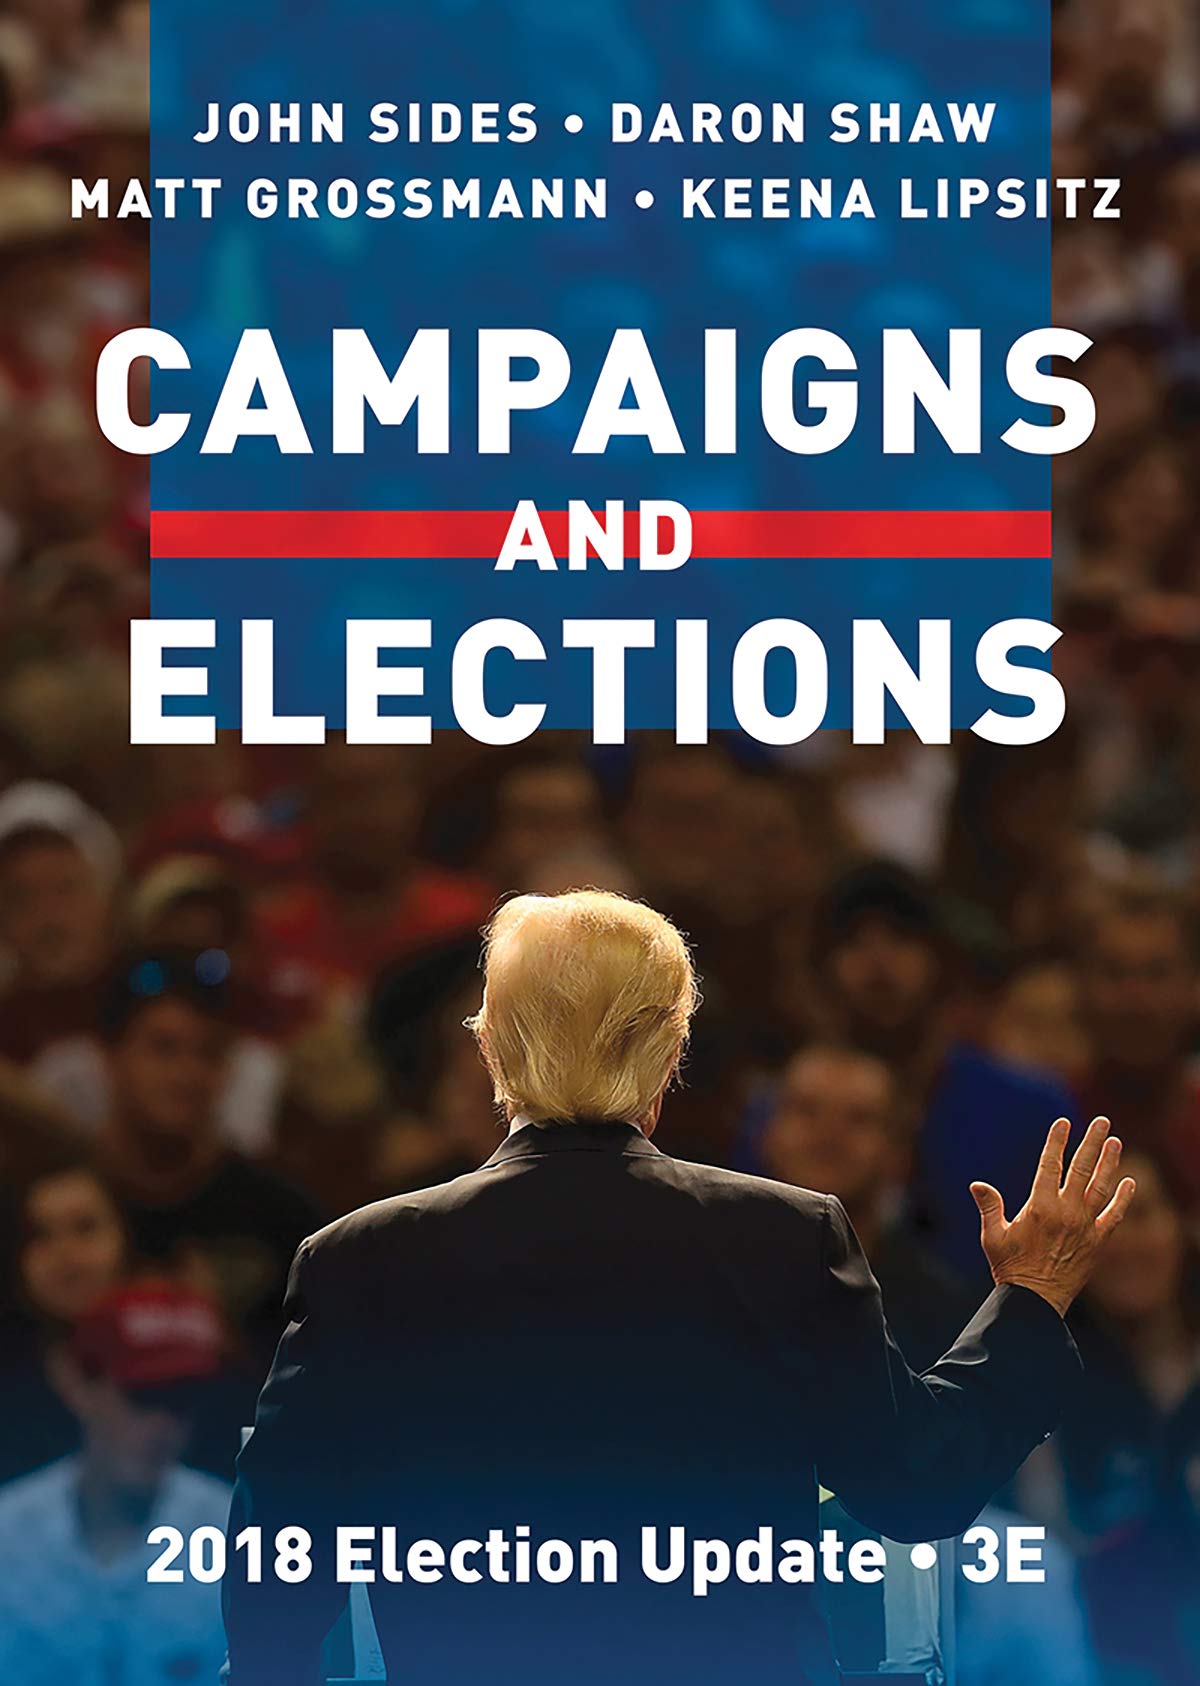 CAMPAIGNS AND ELECTIONS (2018 ELECTION UPDATE) (3rd) - Virginia Book Company